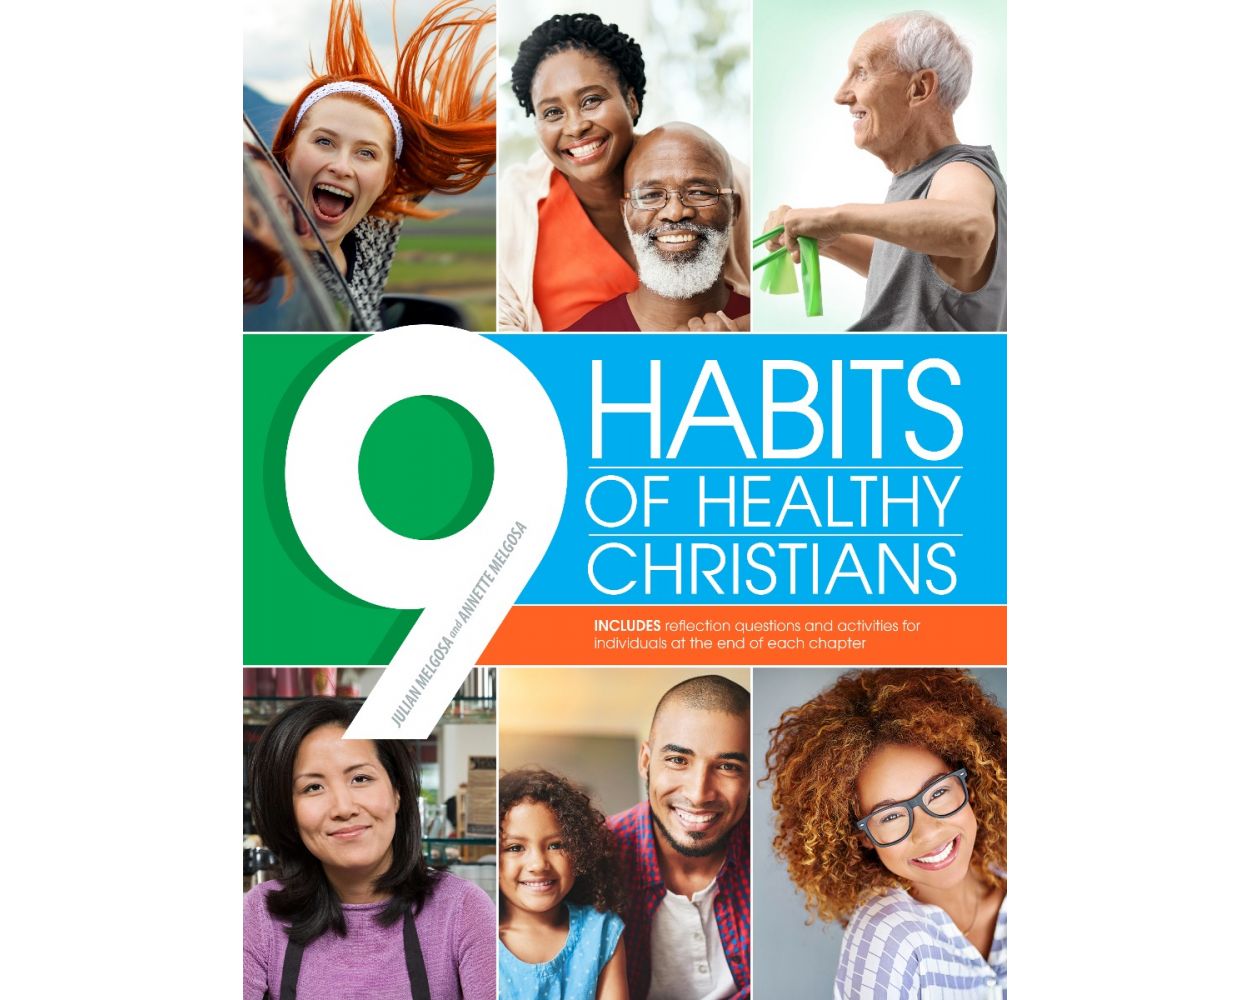 9 Habits of Healthy Christians